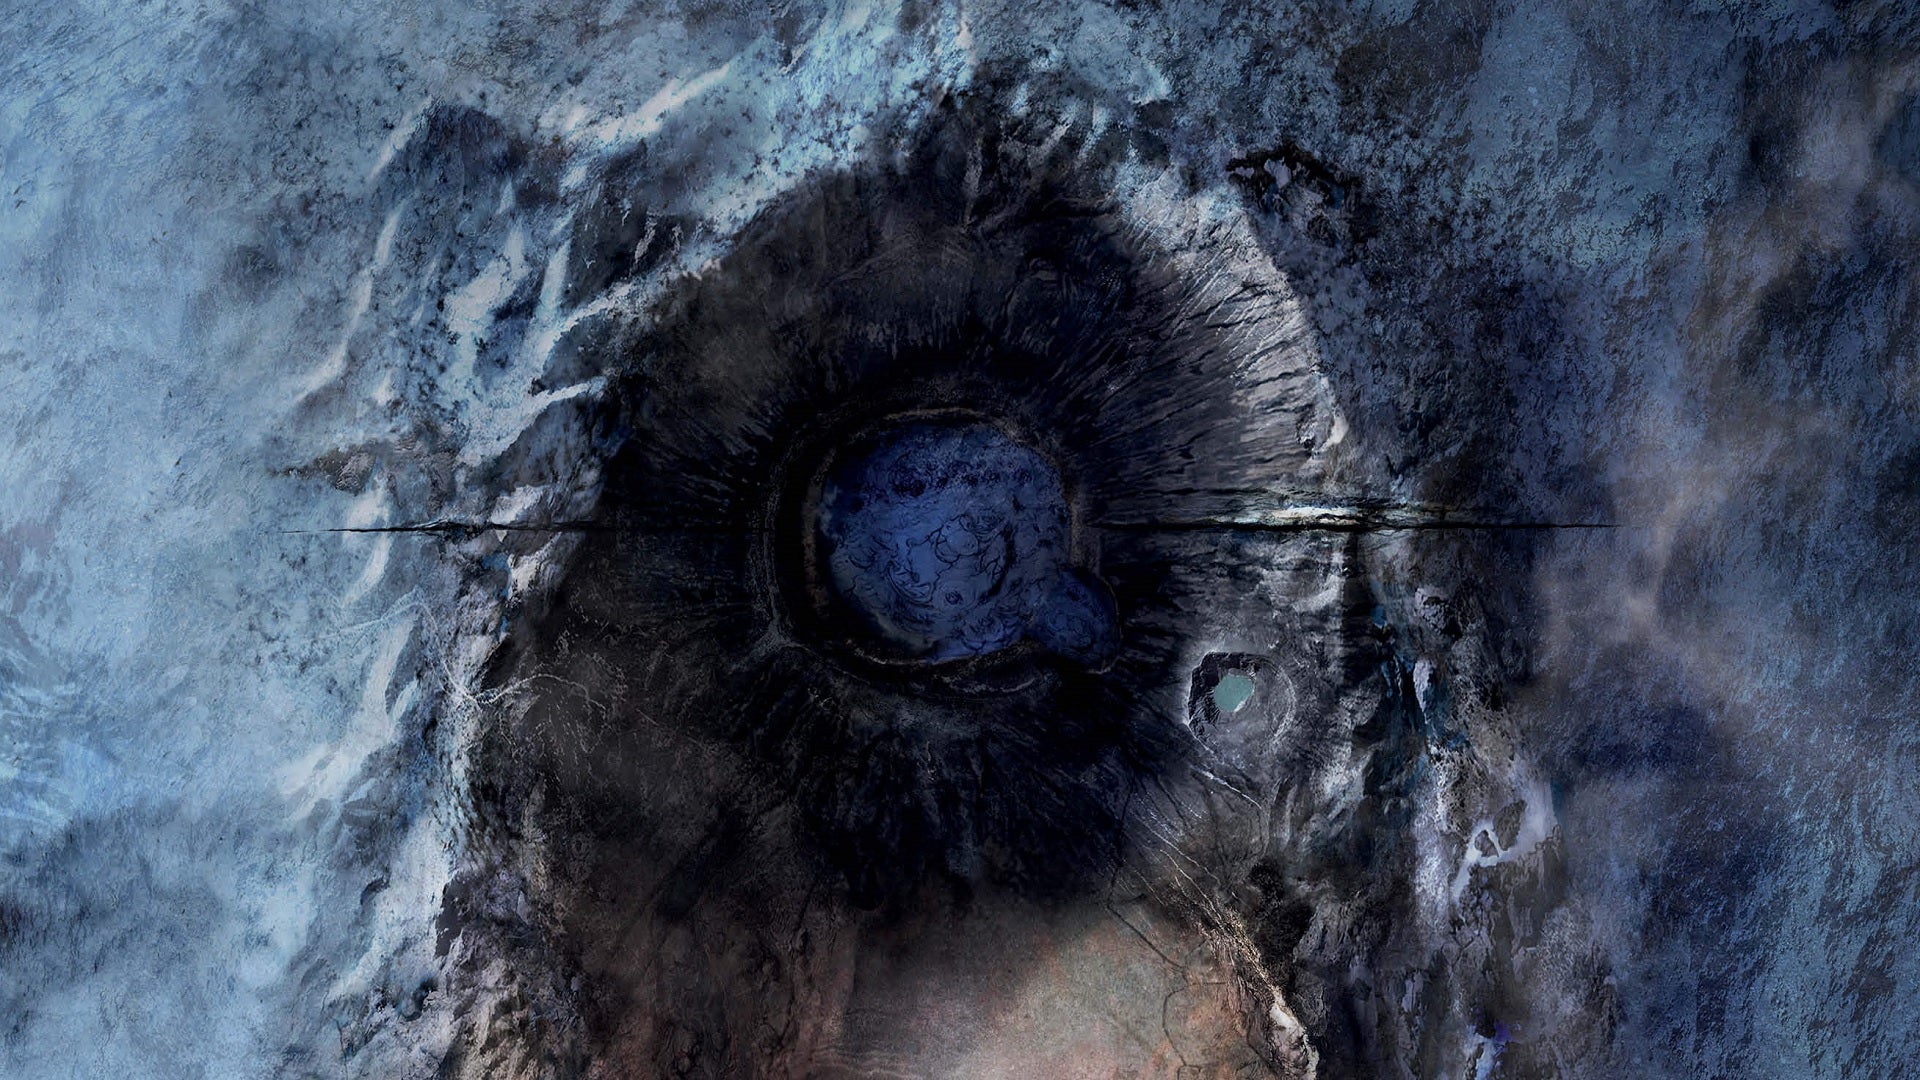 A close up of the top of the geth head in the new Mass Effect 5 poster.